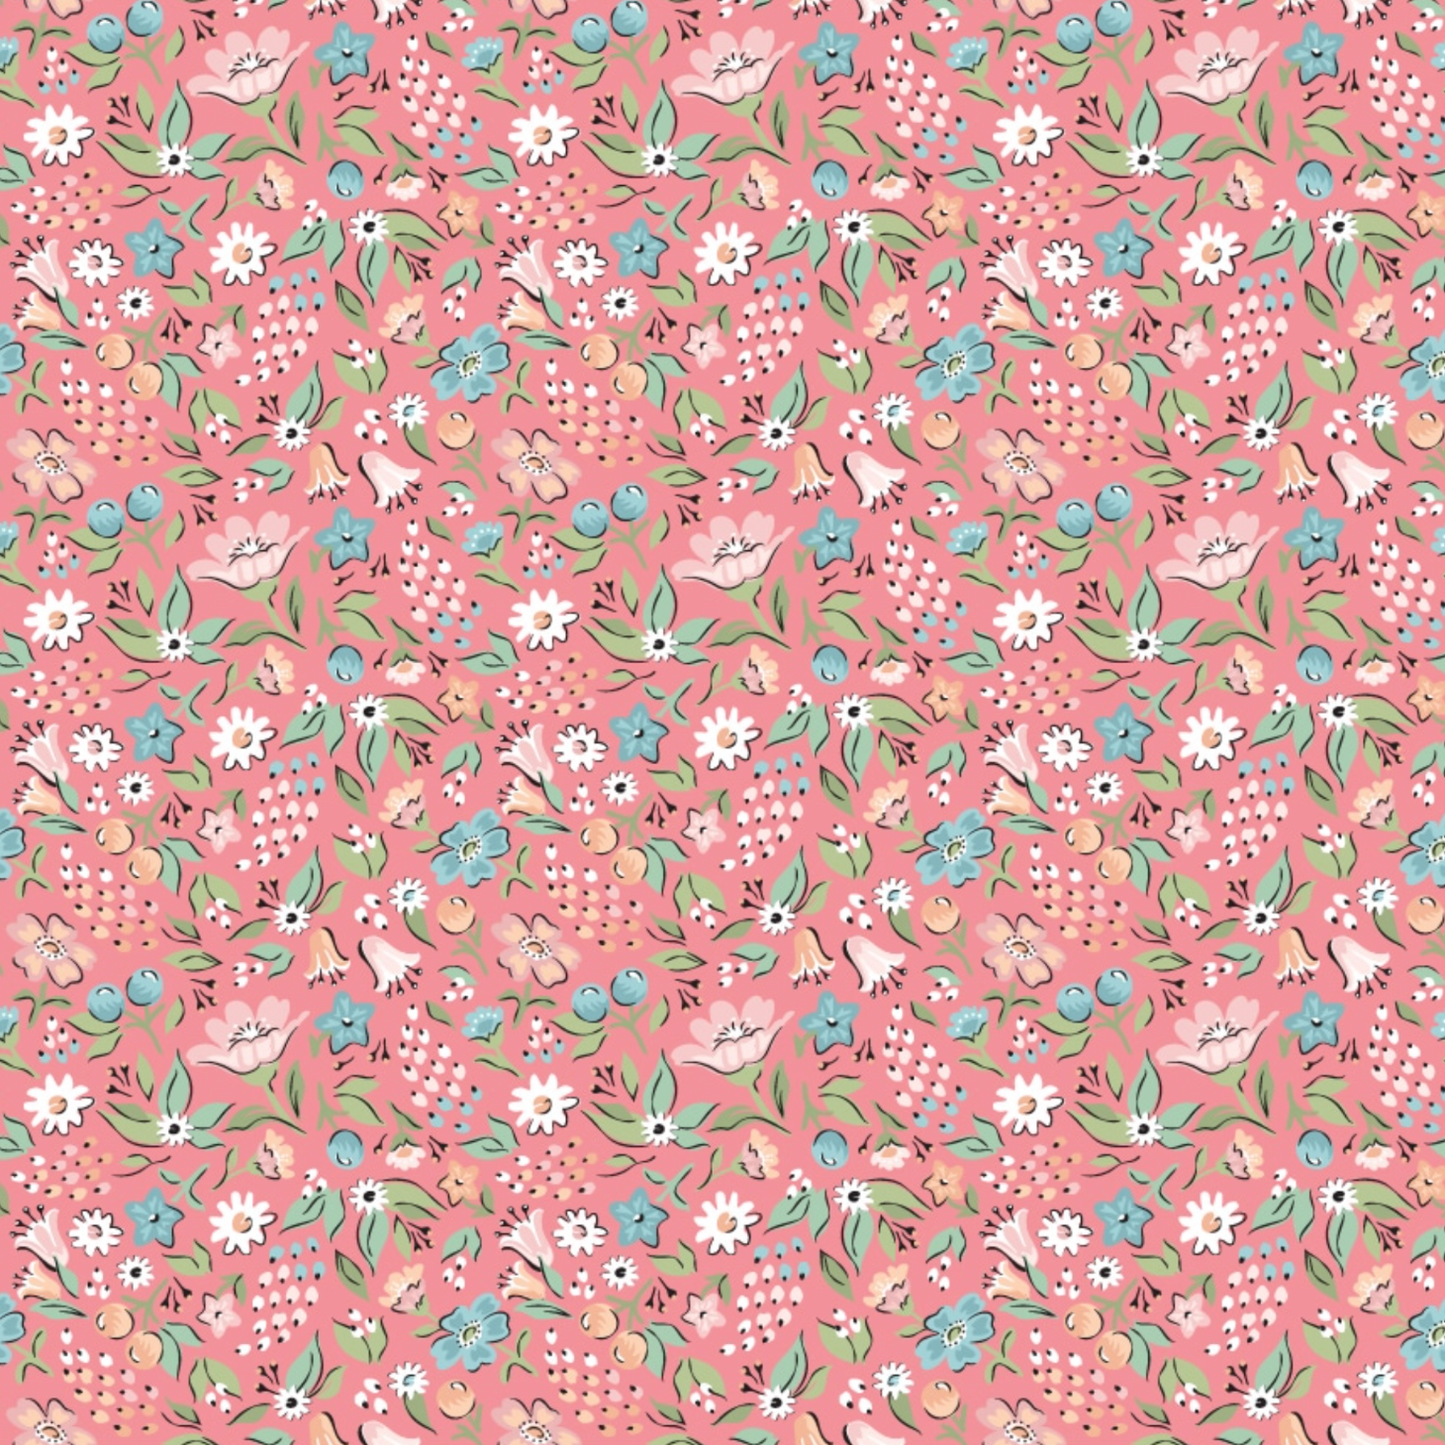 Garden Party, Freshly Picked Raspberry, GP23318, sold by the 1/2 yard